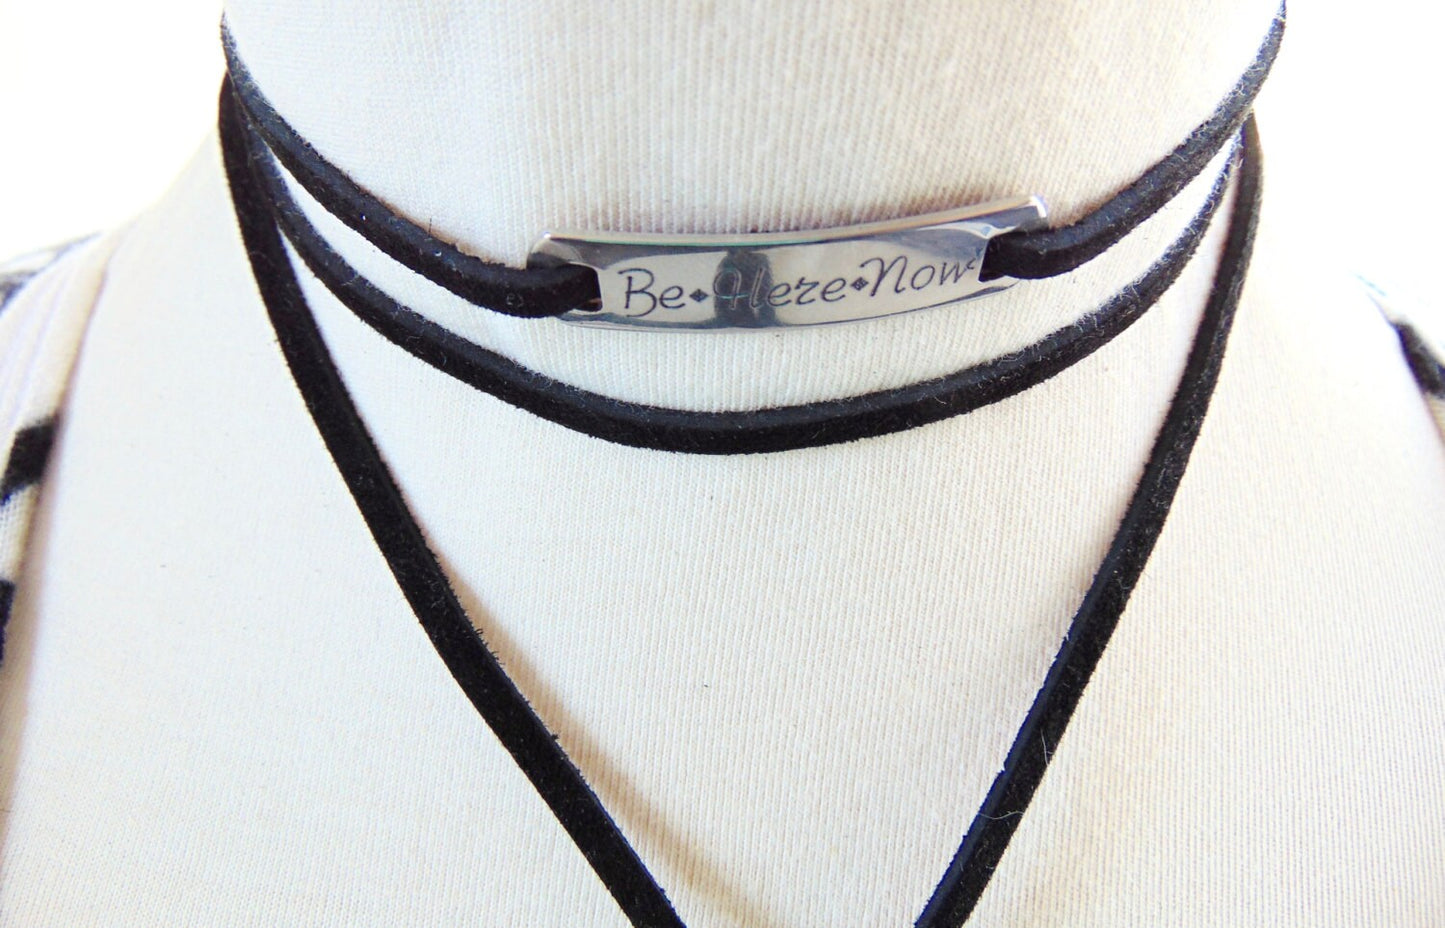 Personalized bar necklace with Black leather, Sued Y drop tie necklace, lariat